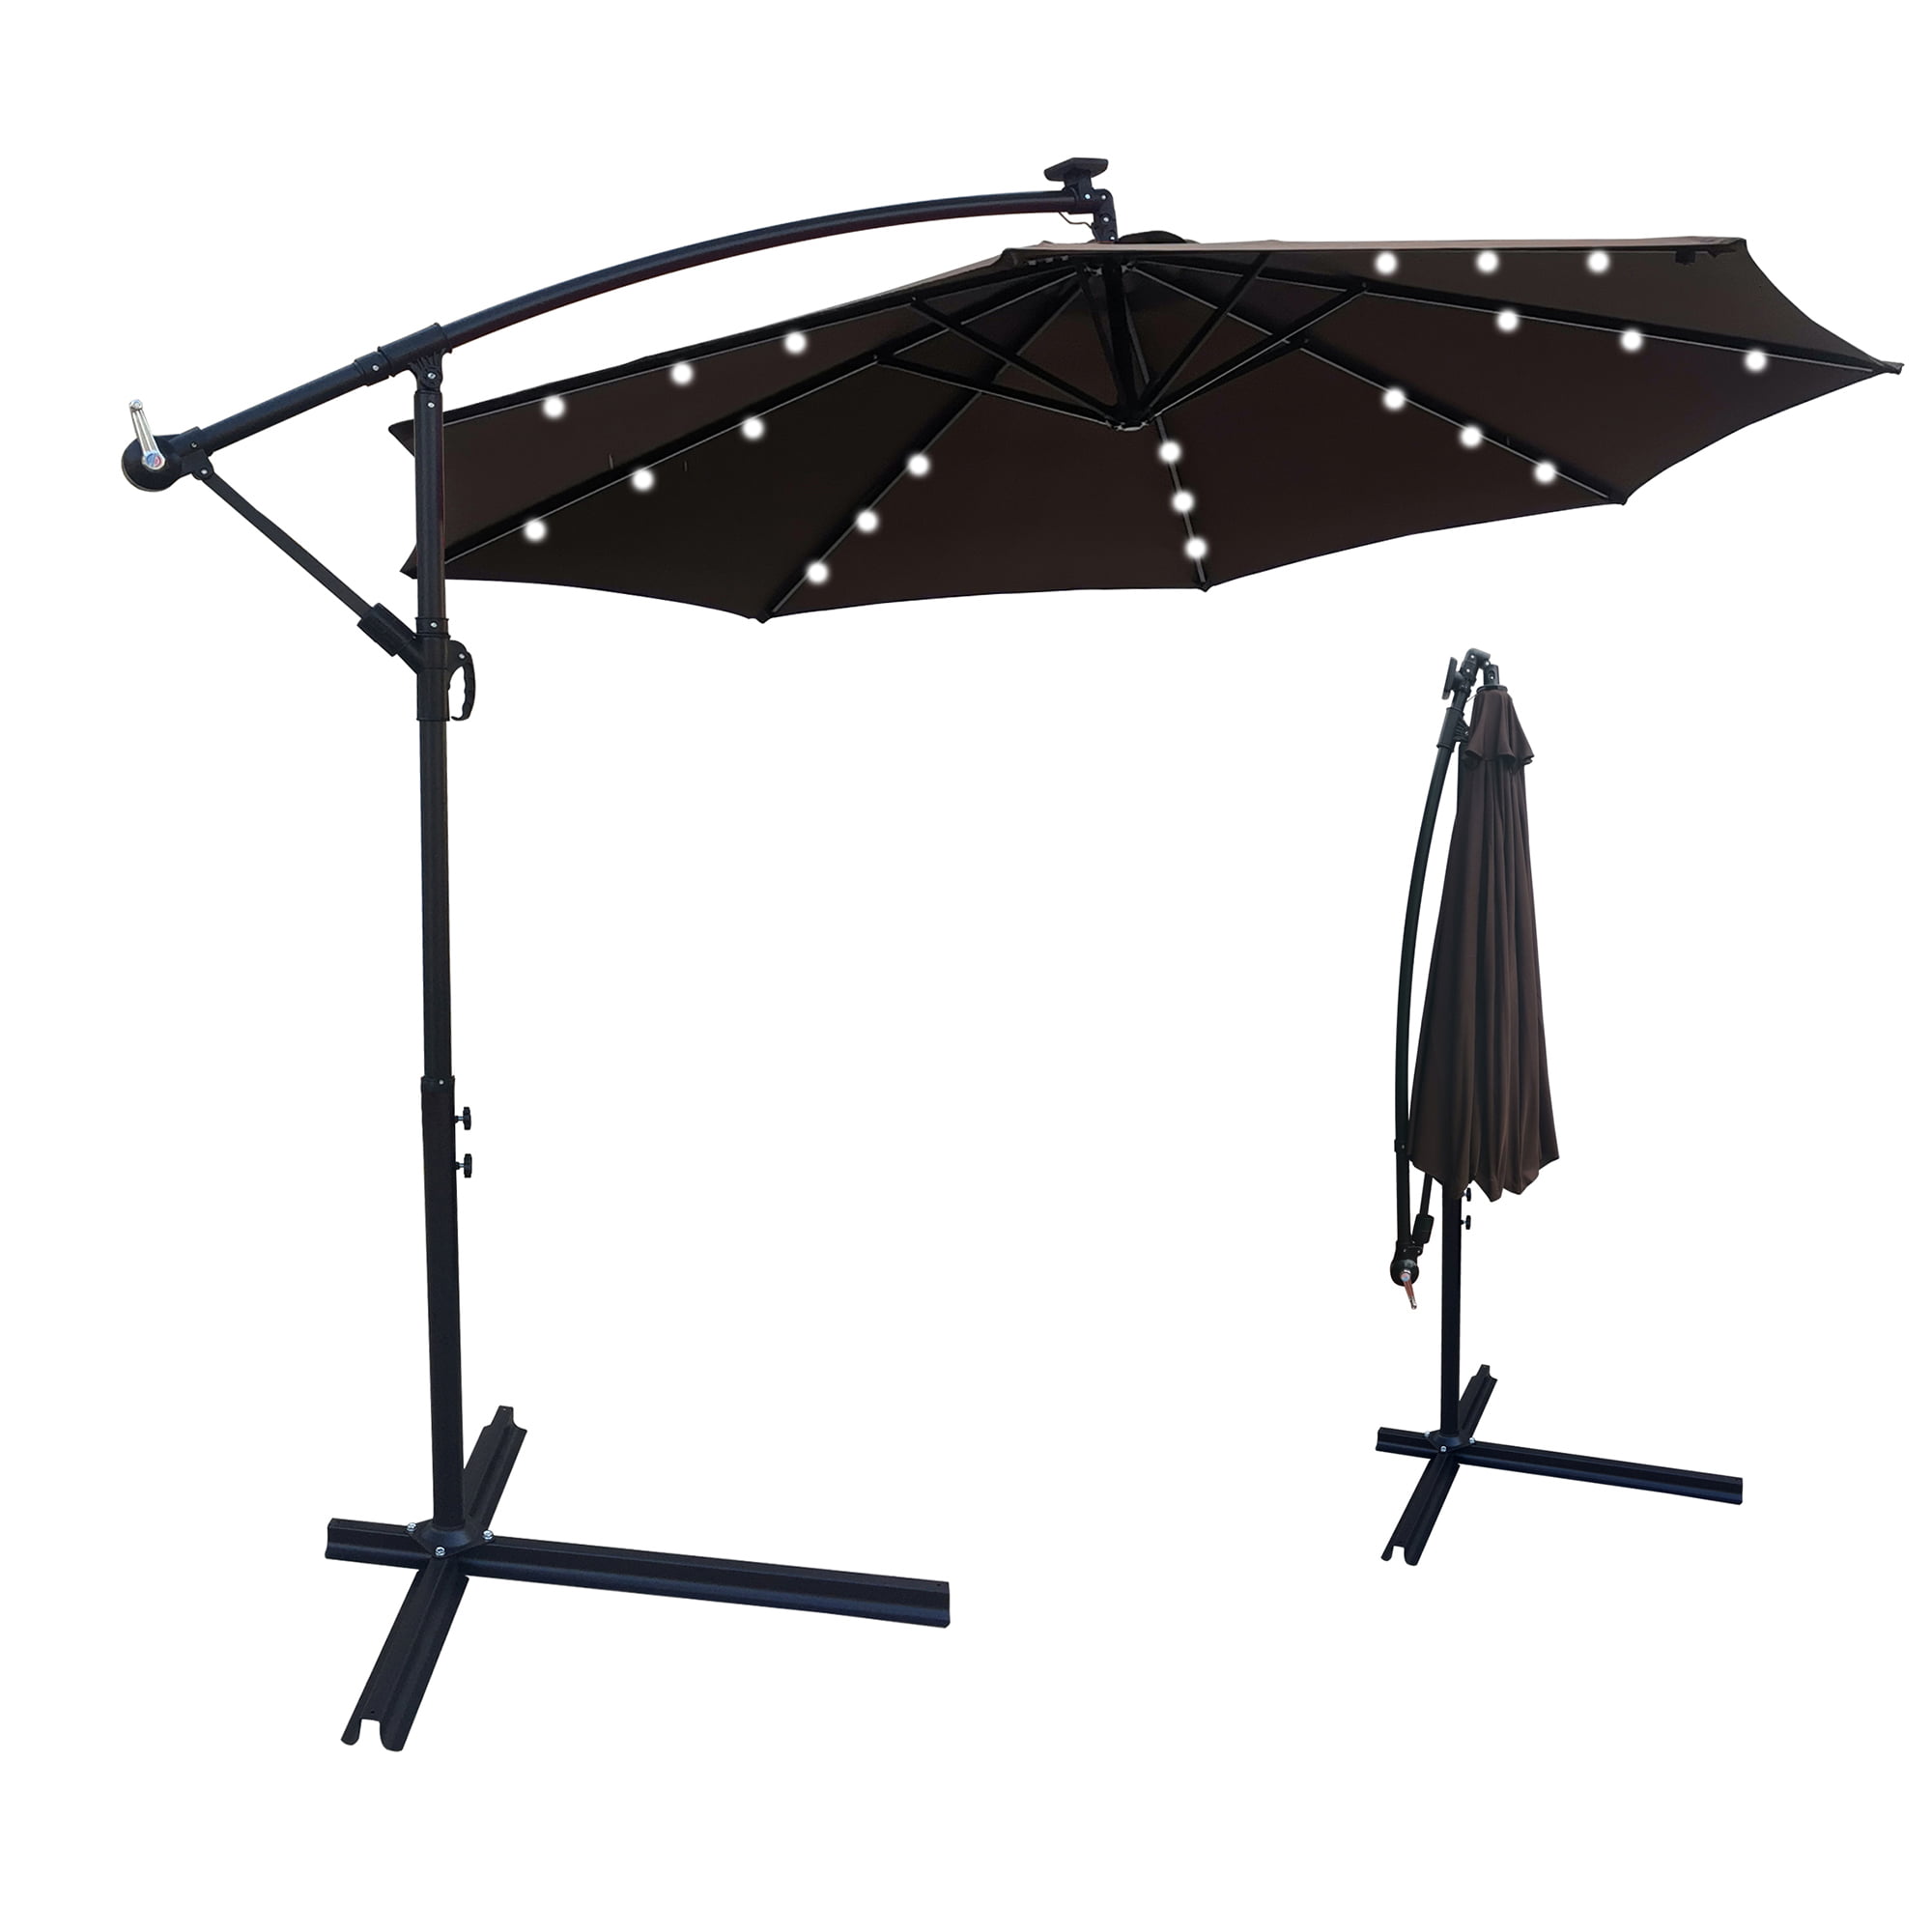 Details about   10Ft LED Lighted Market Solar Umbrella  Powered Table 8 Ribs Tan  Patio 